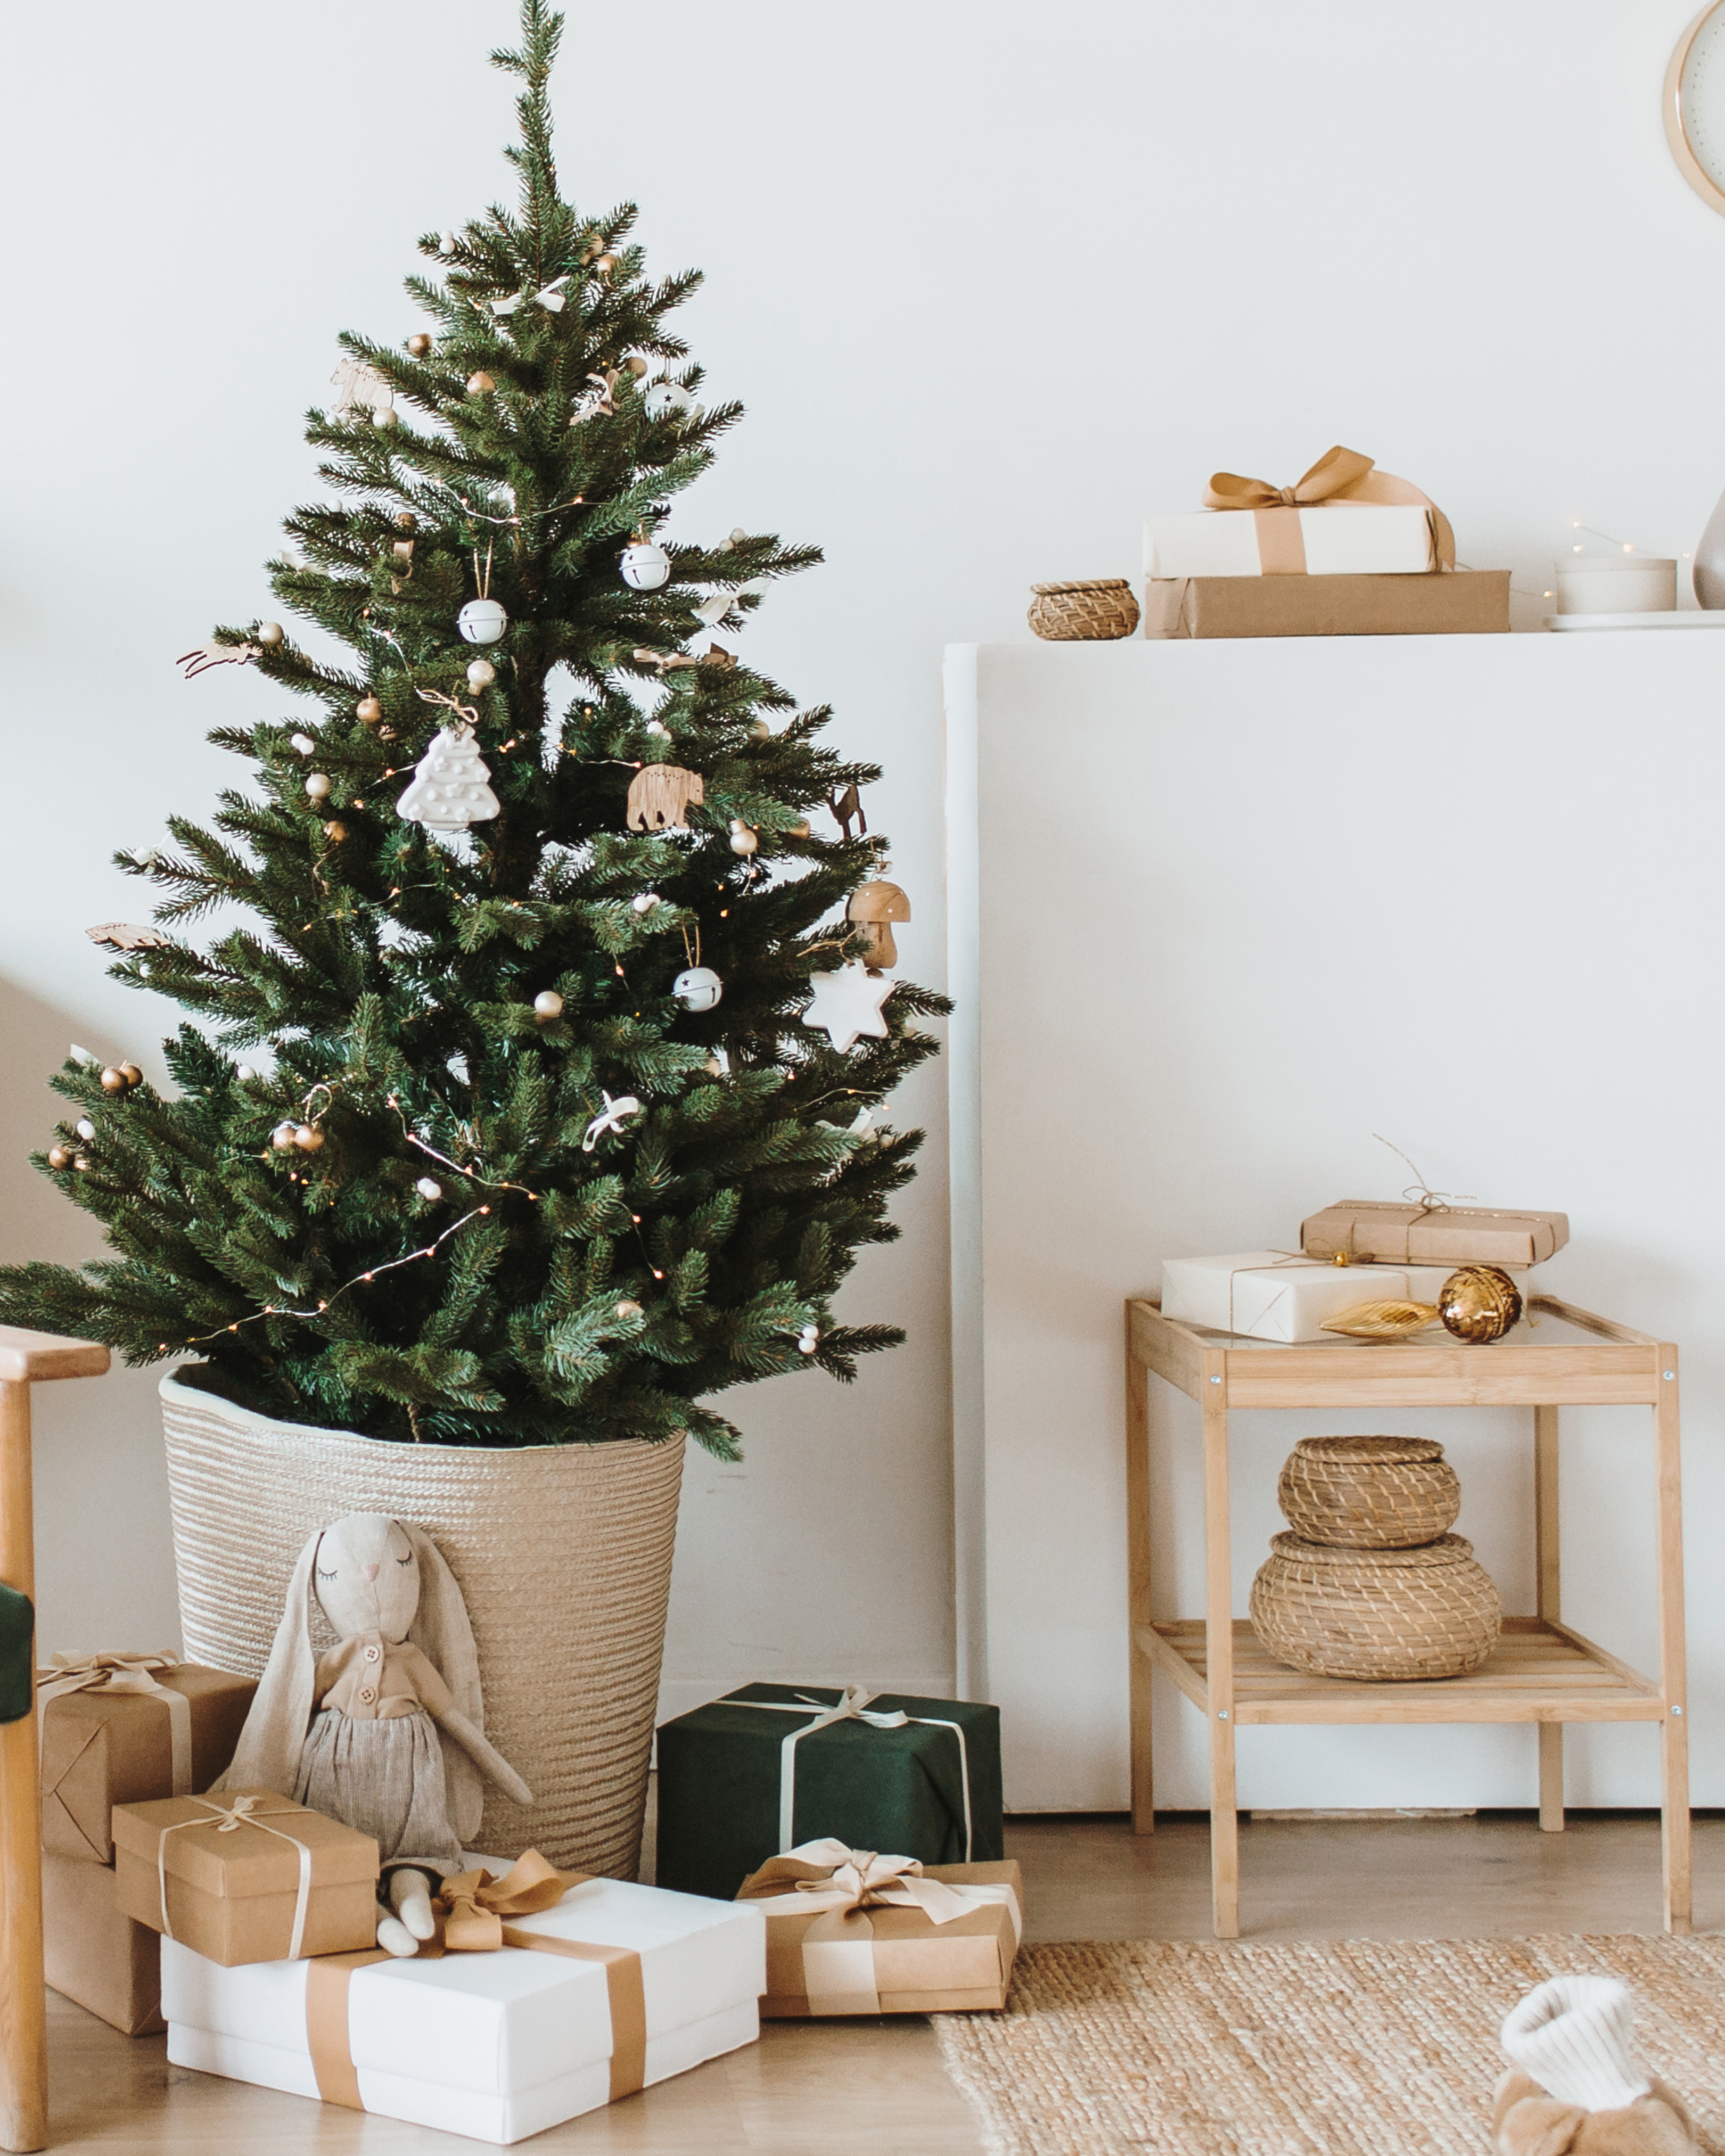 5 Tips for an Eco-Friendly Christmas